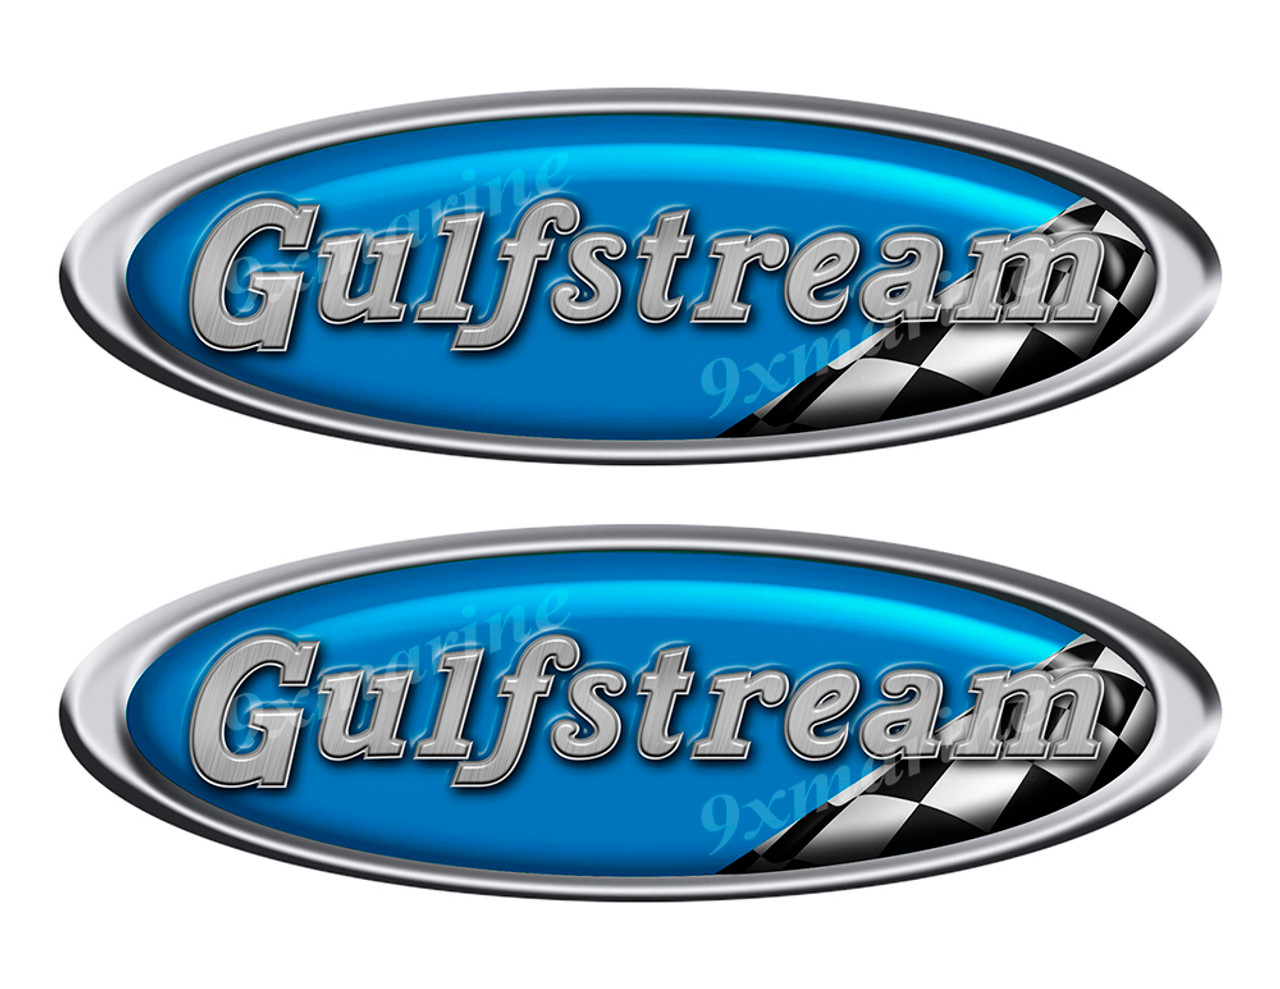 Two Gulfstream Vinyl Racing Oval Stickers - 10" long each